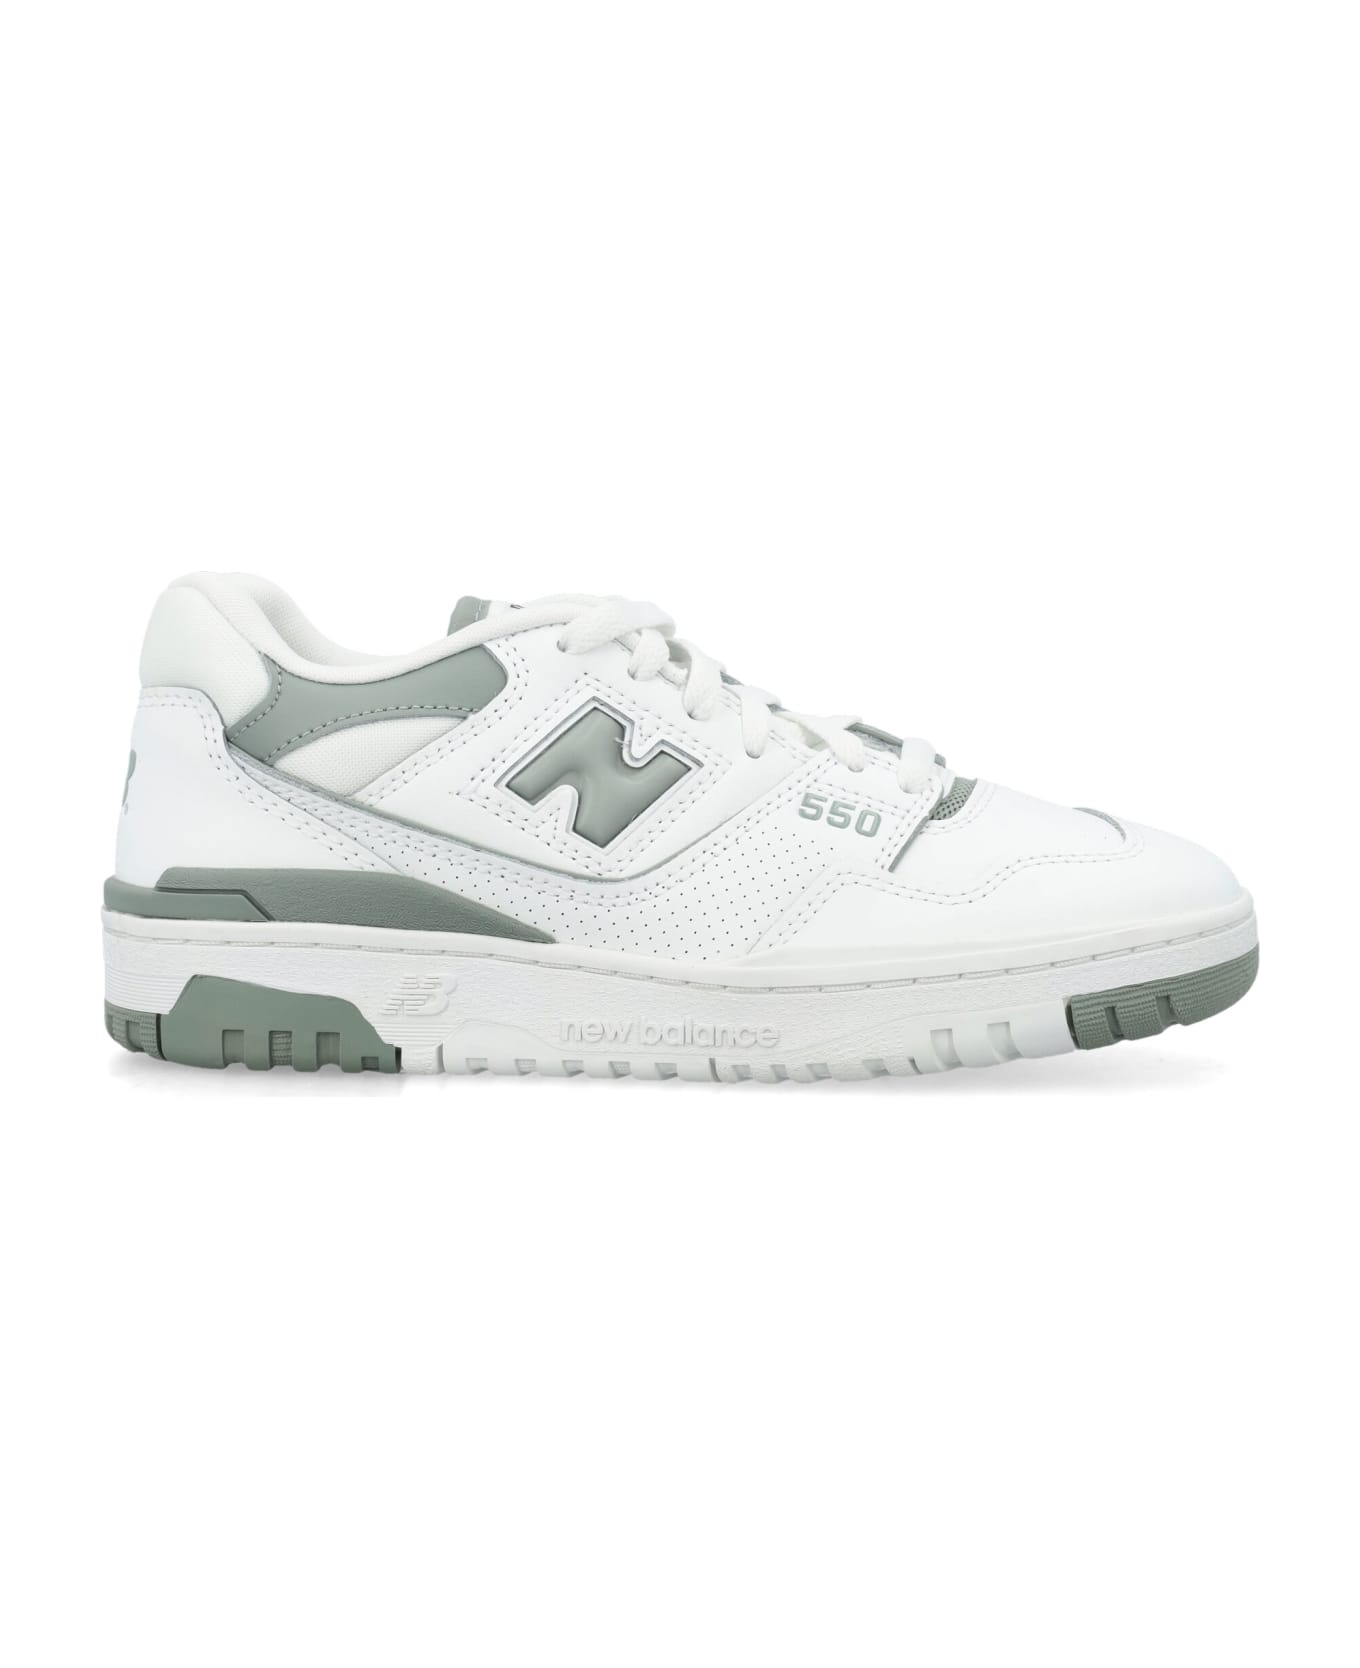 New Balance 550 Woman's Sneakers - WHITE GREEN スニーカー